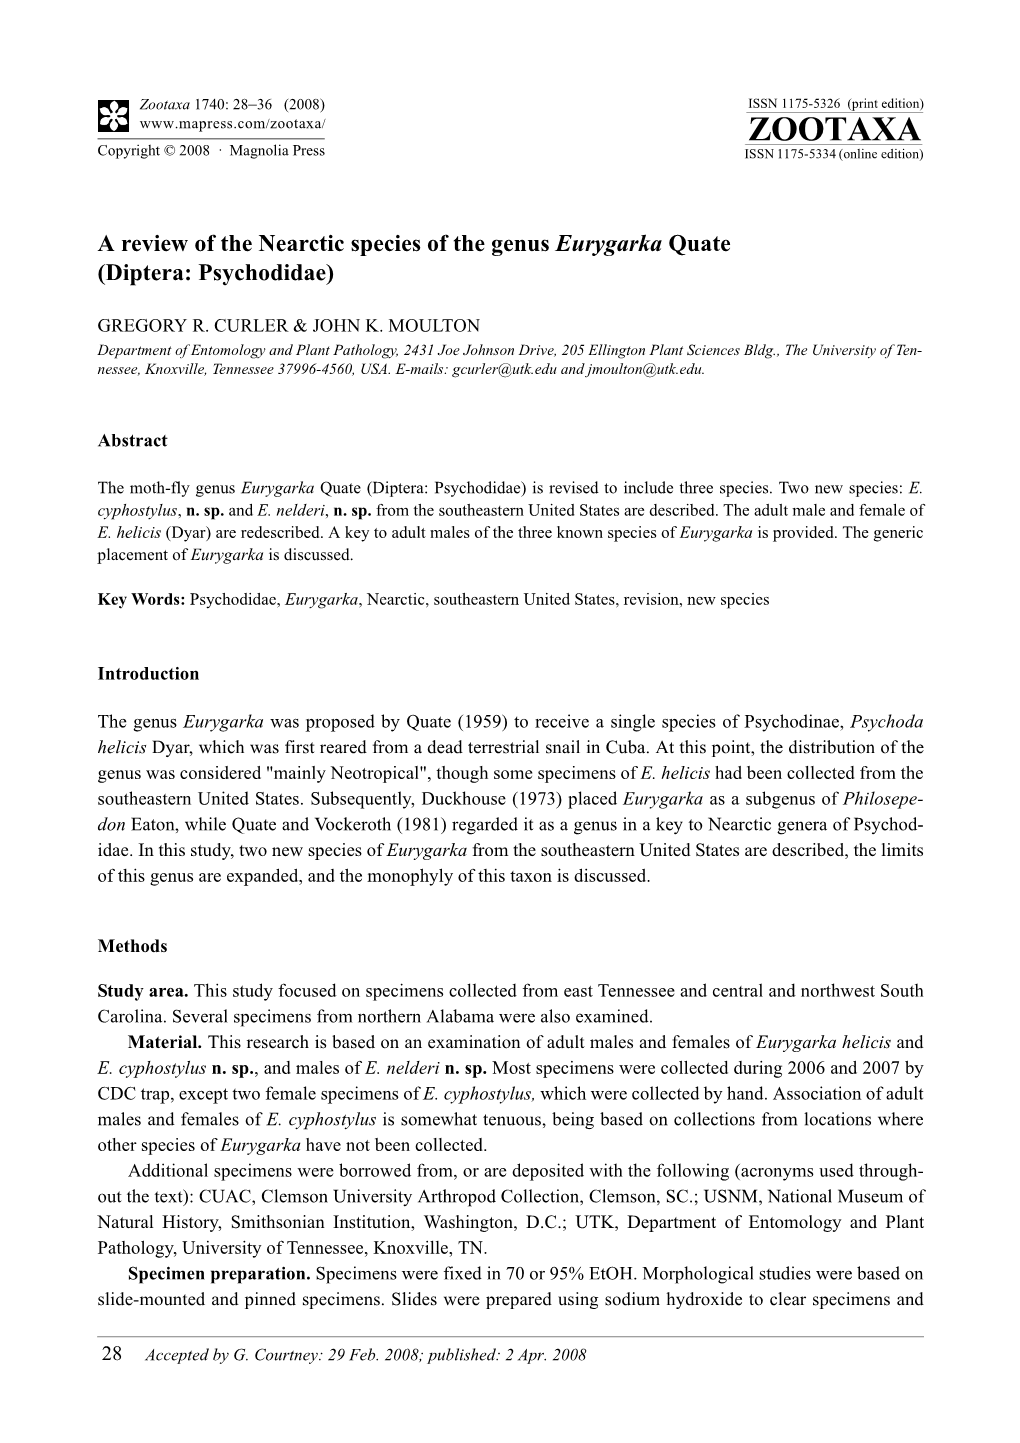 Zootaxa, a Review of the Nearctic Species of the Genus Eurygarka Quate